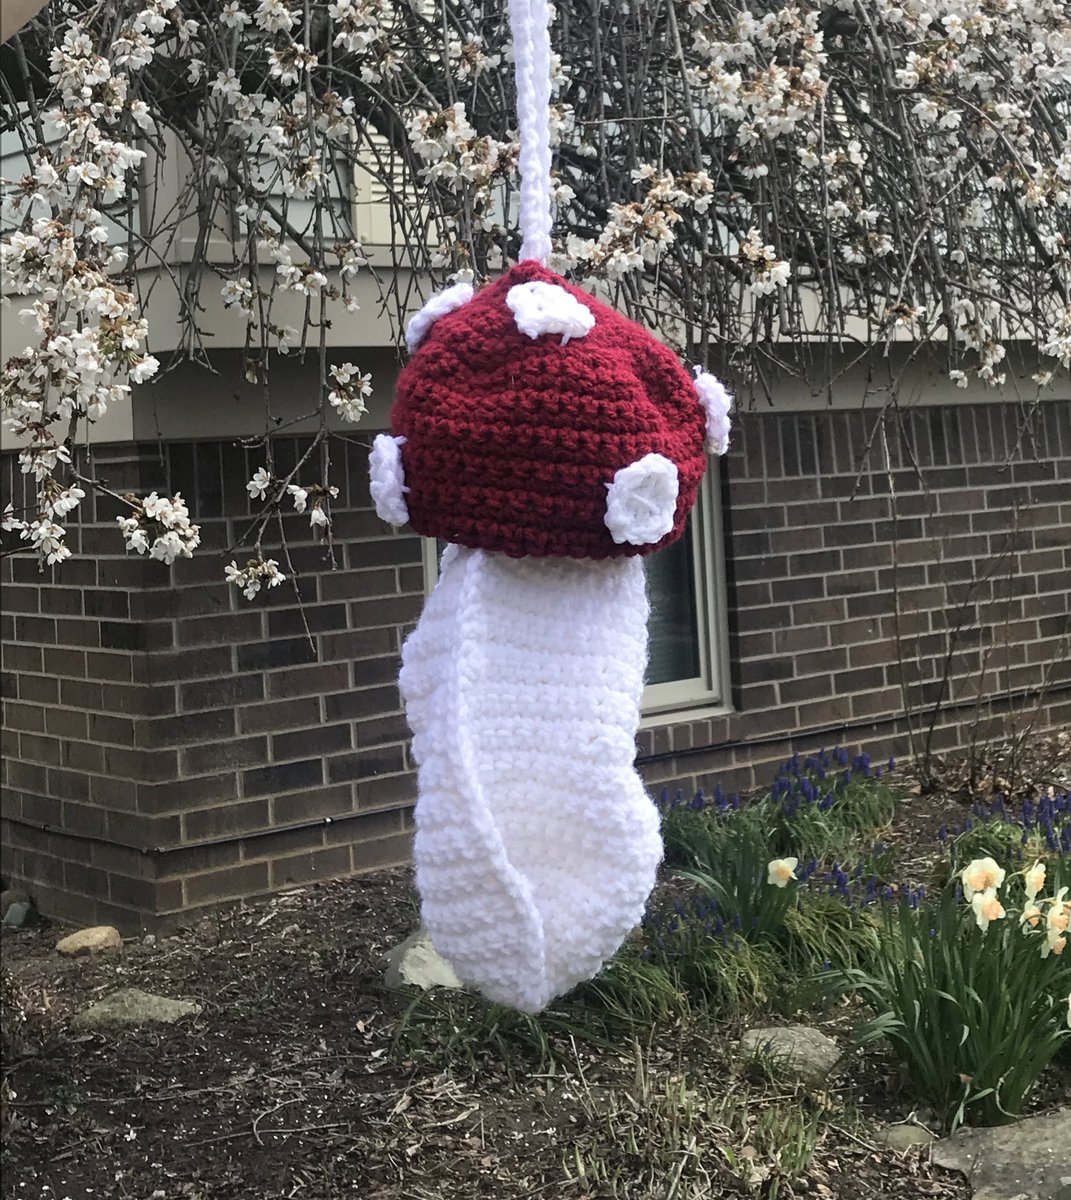 i crocheted this mushroom bag that’s for sale